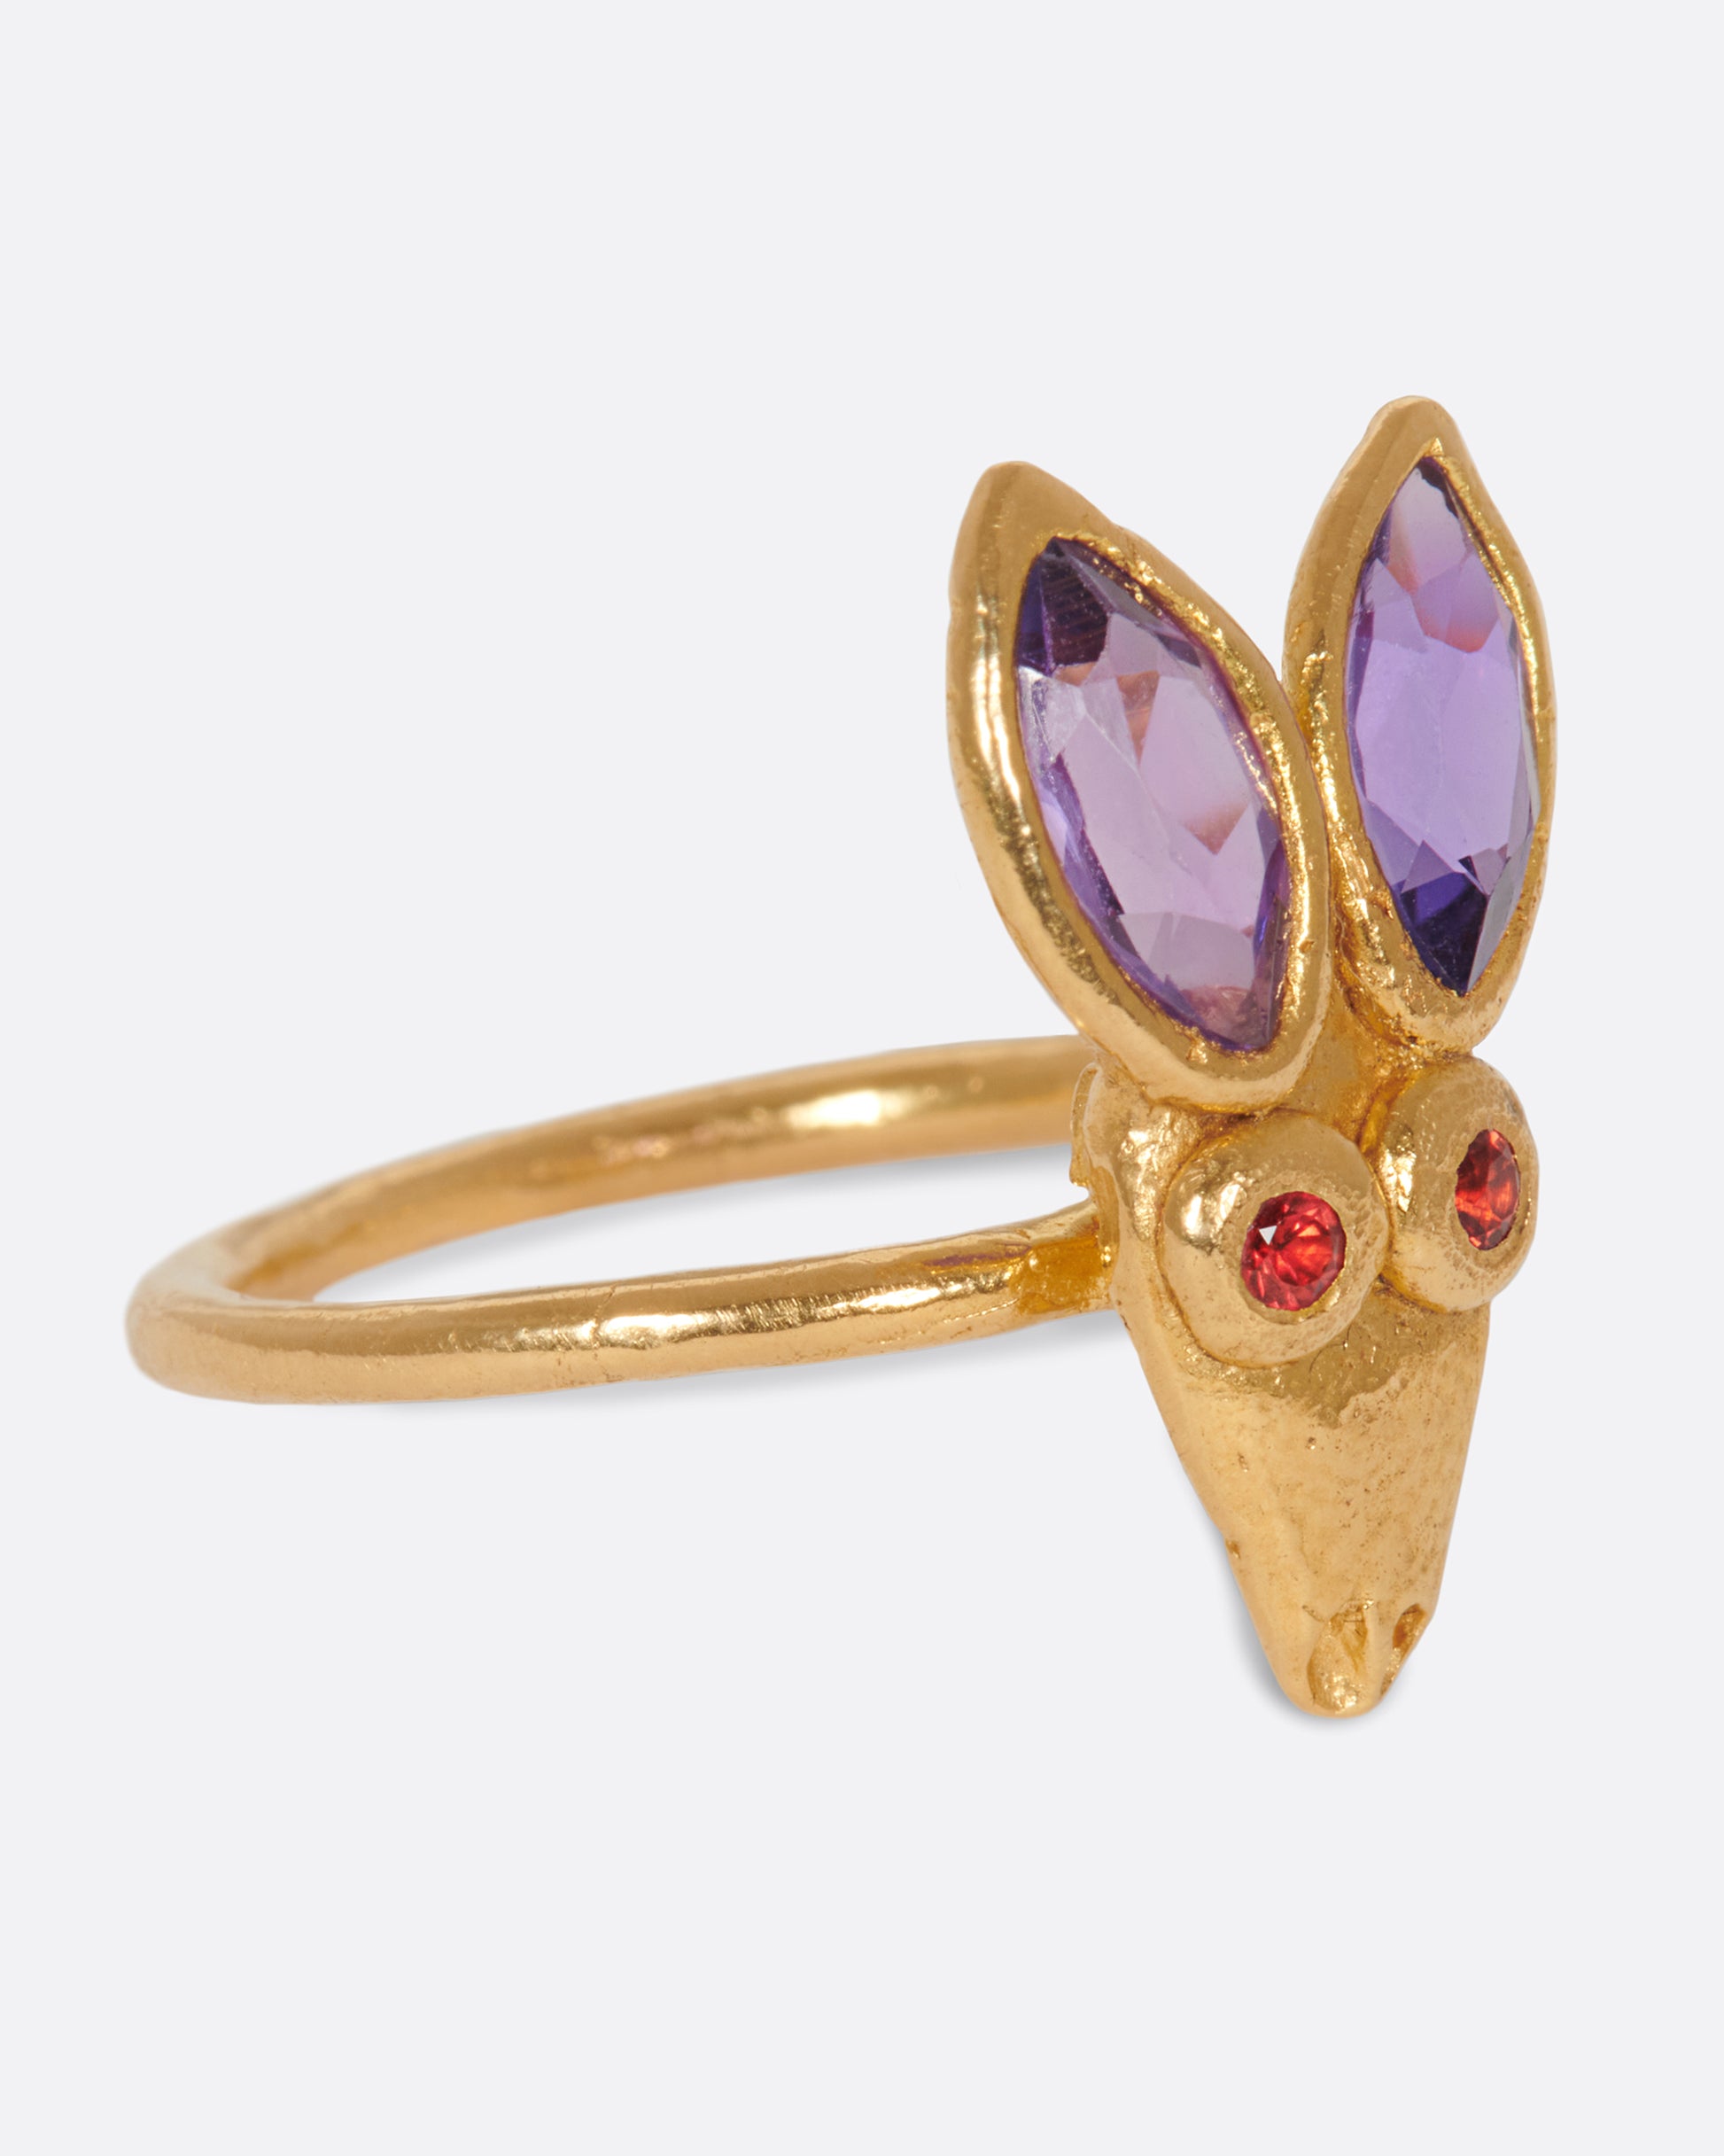 A little, hand-formed rabbit ring with big amethyst ears and red sapphire eyes.